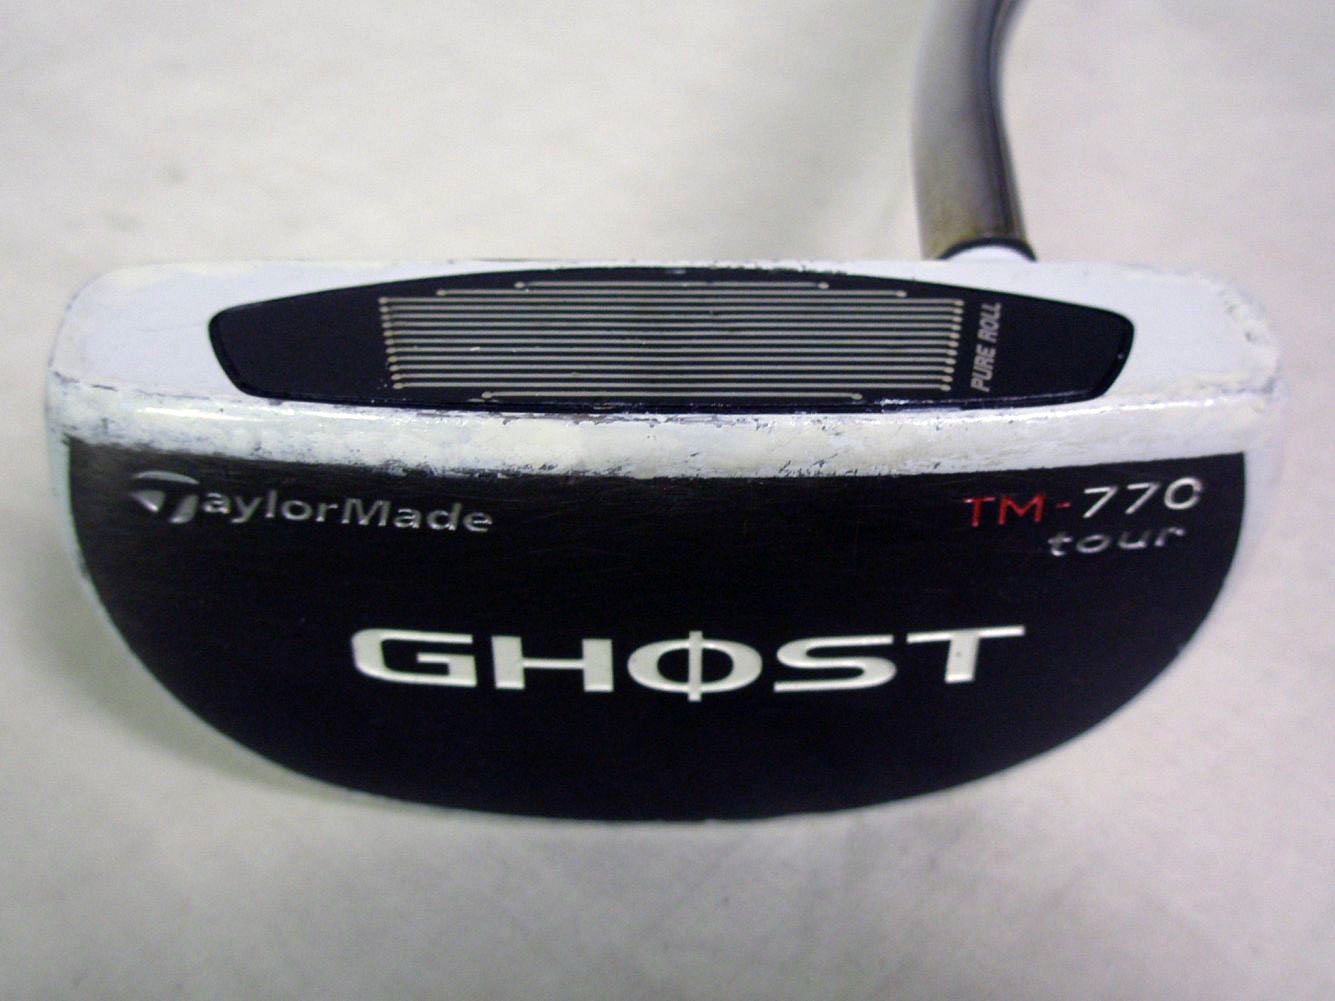 Taylor Made Ghost TM-770 Tour Putter 34